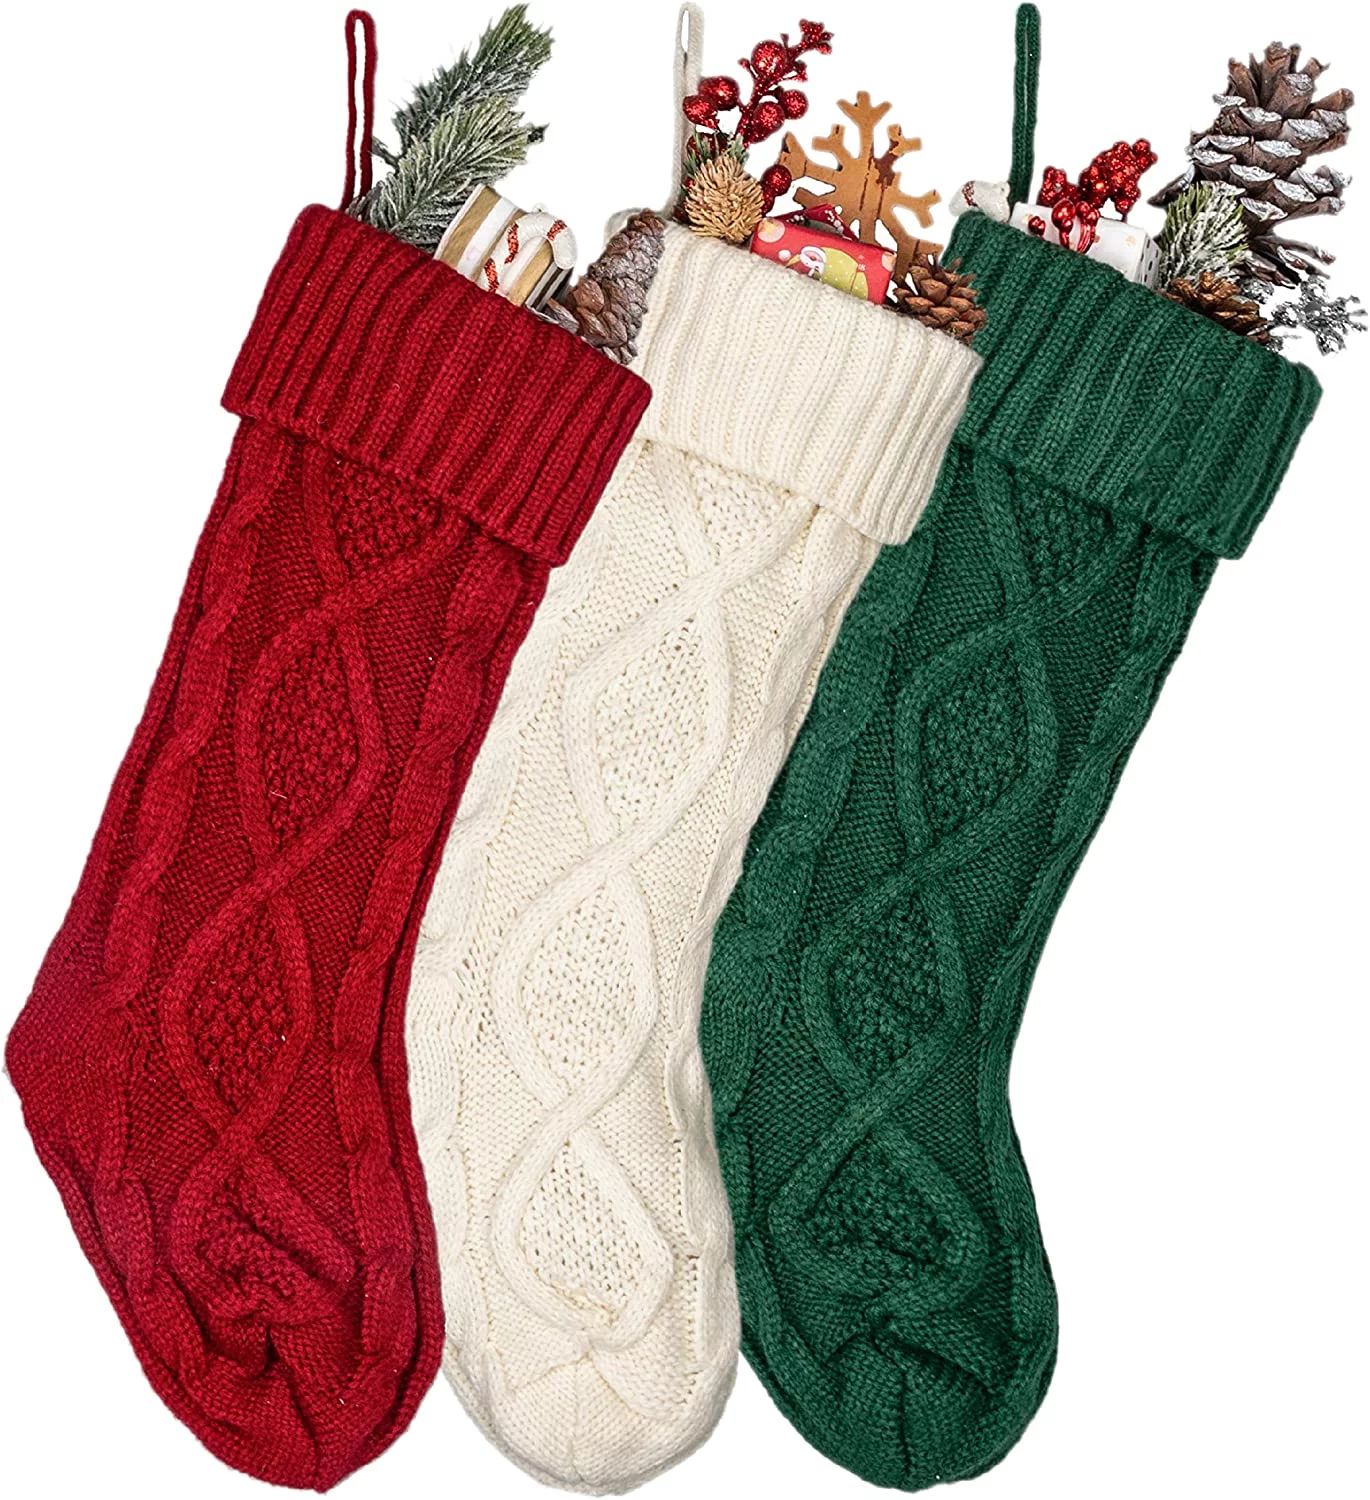 3 Pack Knit Knitted Christmas Stockings Hand Stocking Decorations for Christmas 17" Hanging Socks... | Walmart (US)